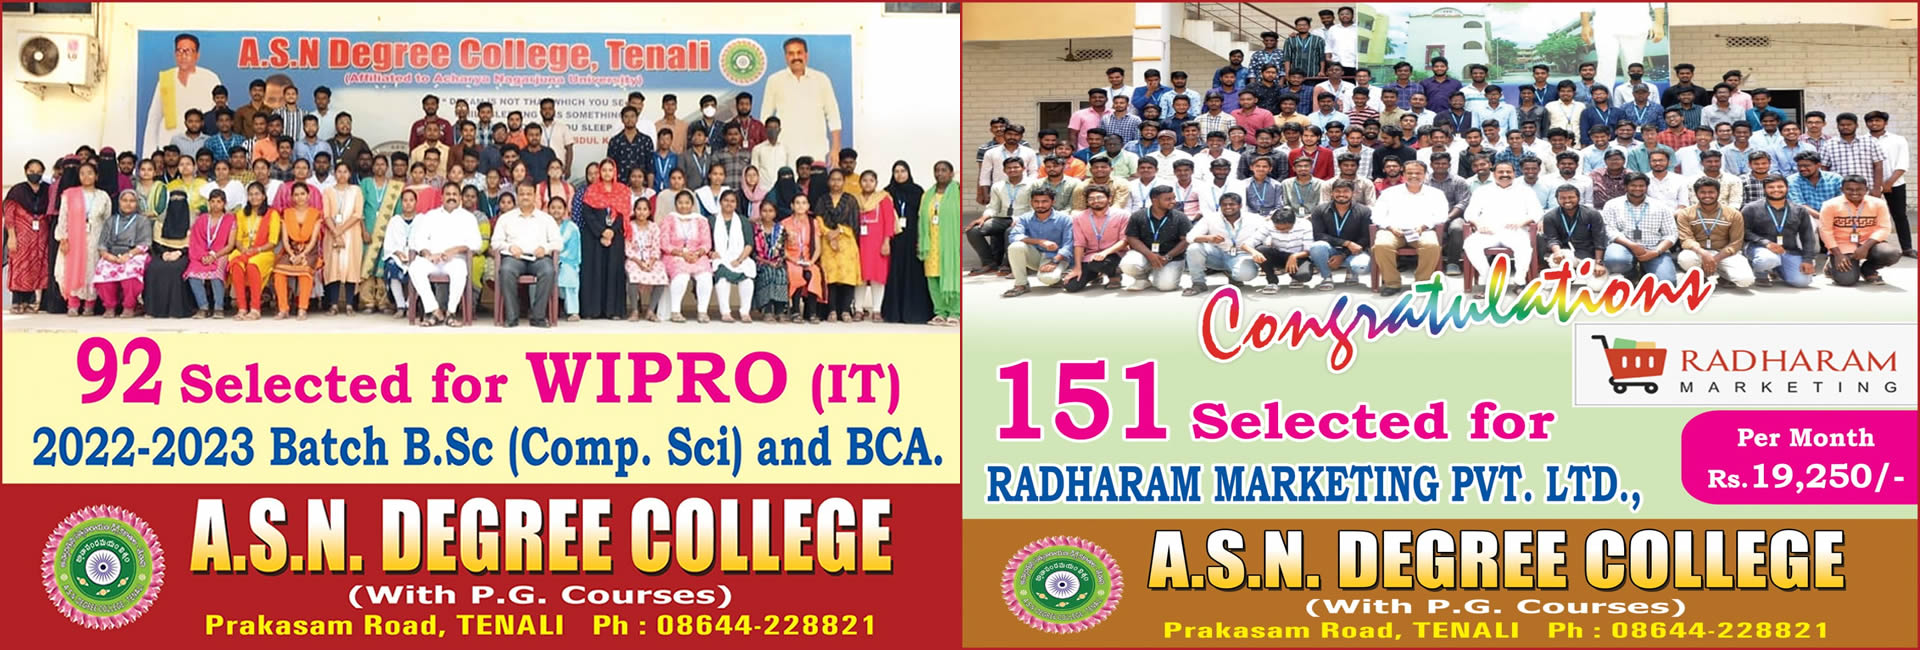 A.S.N. DEGREE COLLEGE